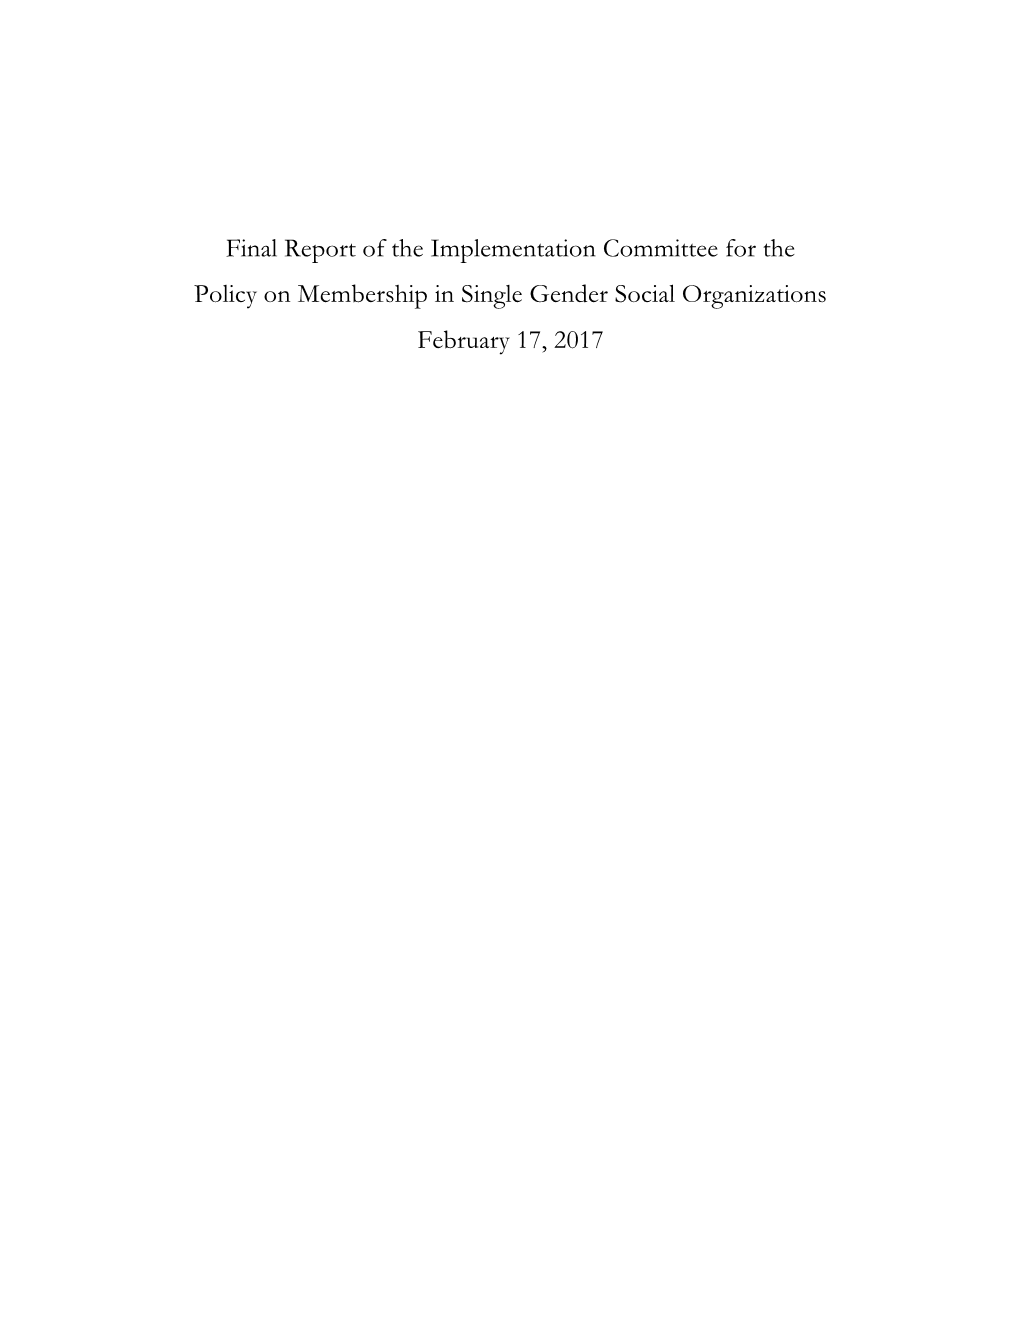 Implementation Committee Final Report 02.17.2017